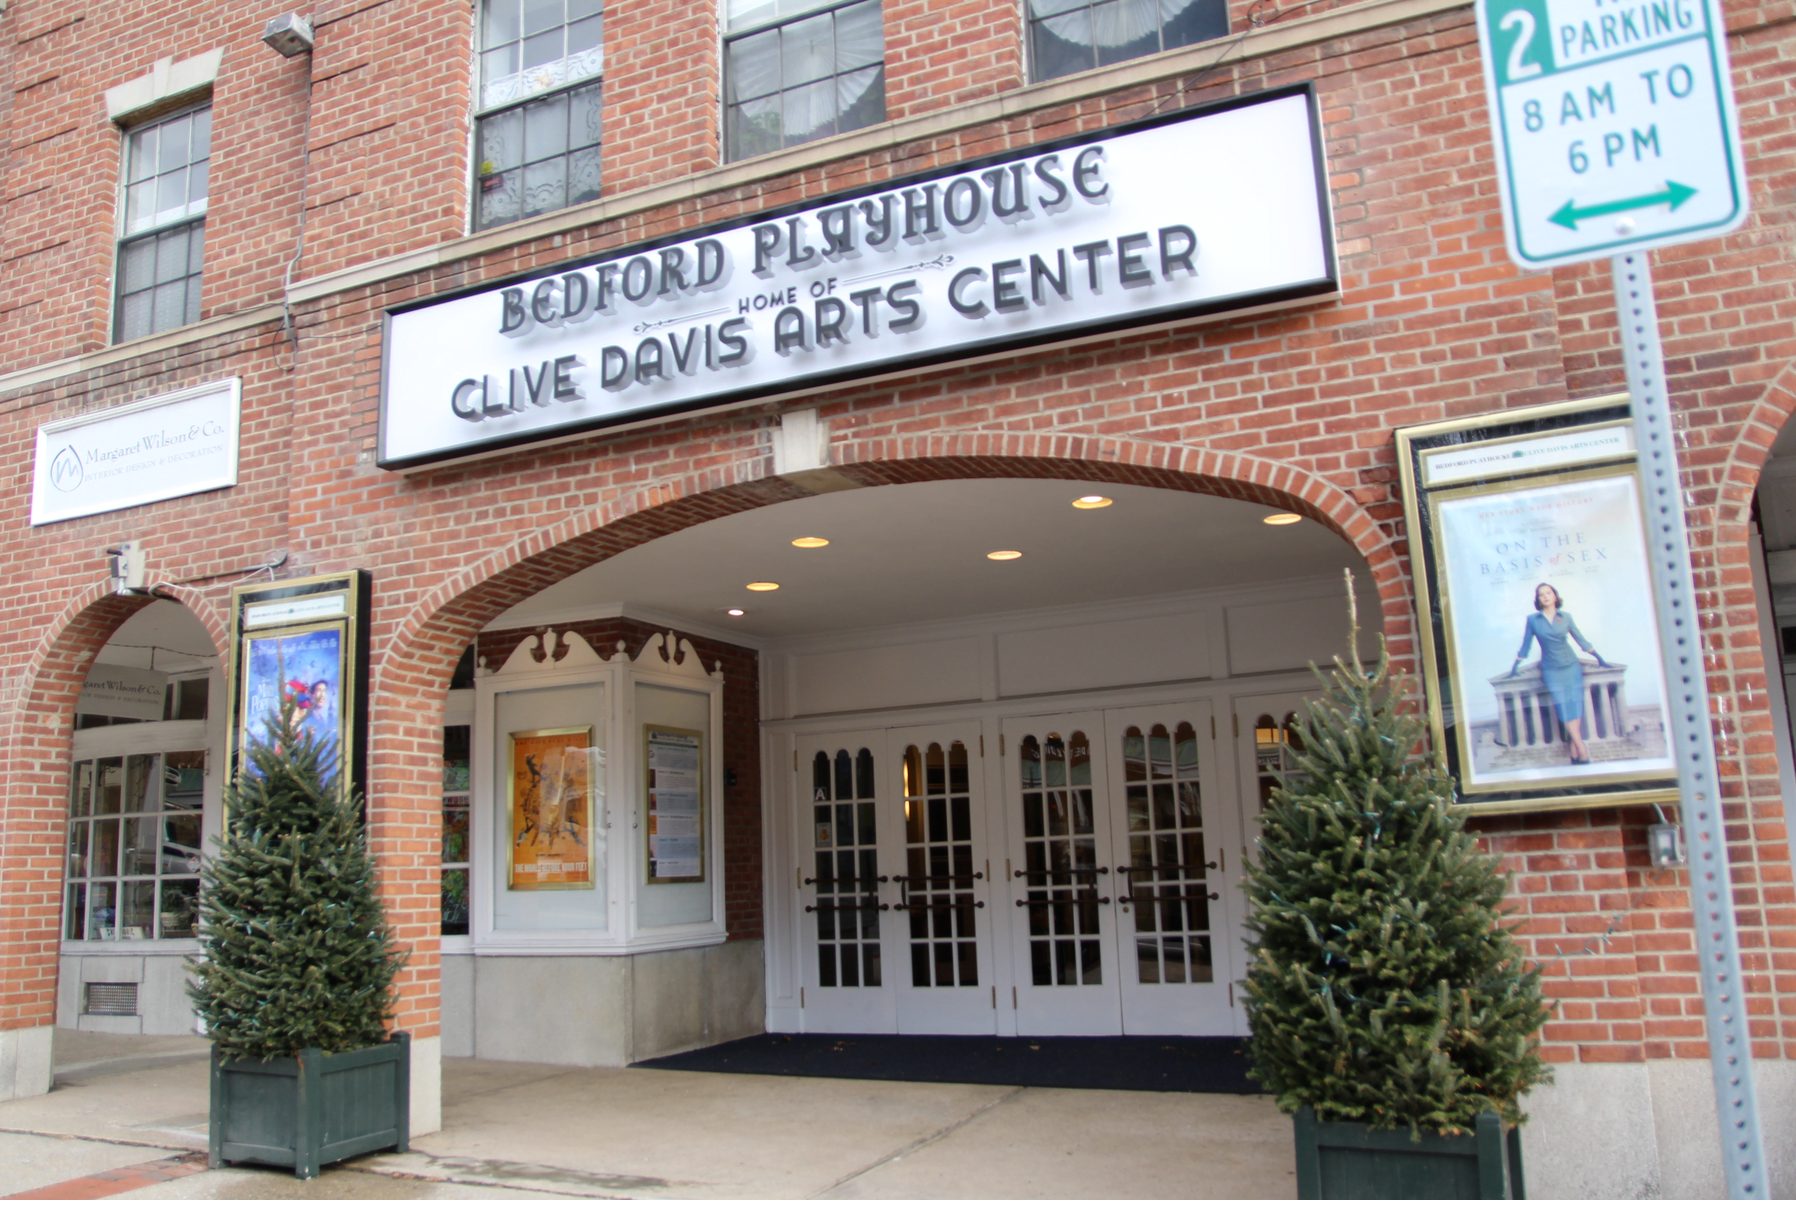 Entrance to the Bedford Playhouse at 633 Old Post Road, Bedford, NY. Photo: Leslie Yager